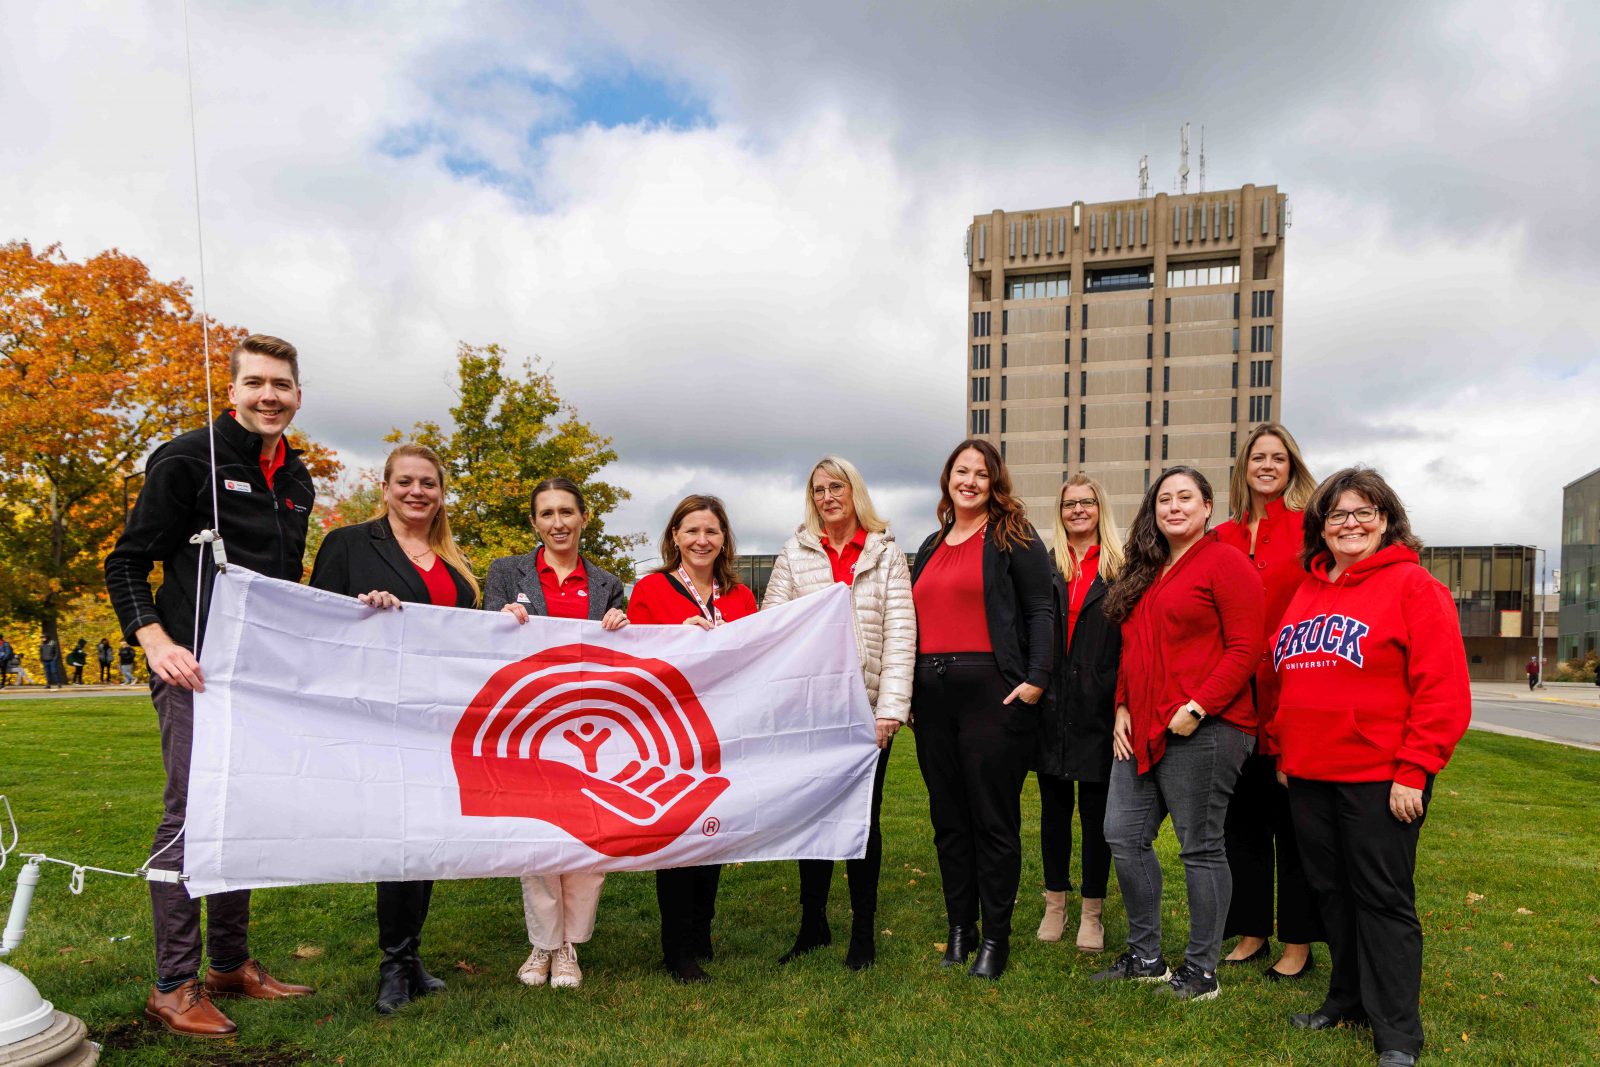 Ten people stand side by side holding a large United Way flag. Brock University's Schmon Tower stands tall in the background.